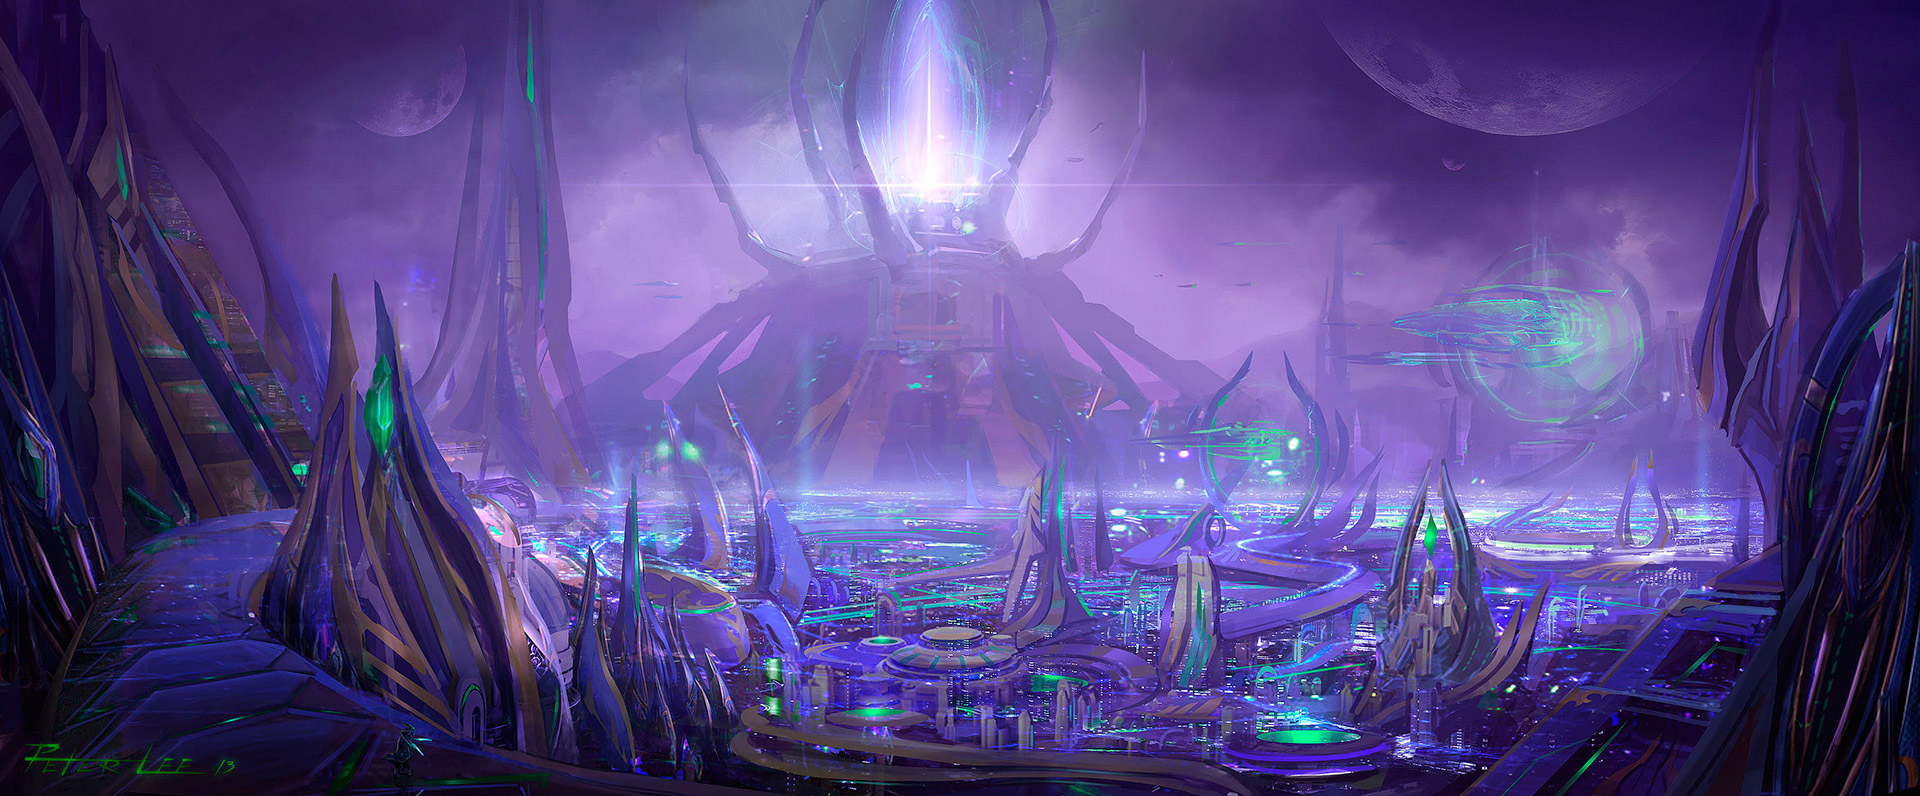 Video Game StarCraft II: Legacy of the Void HD Wallpaper | Background Image